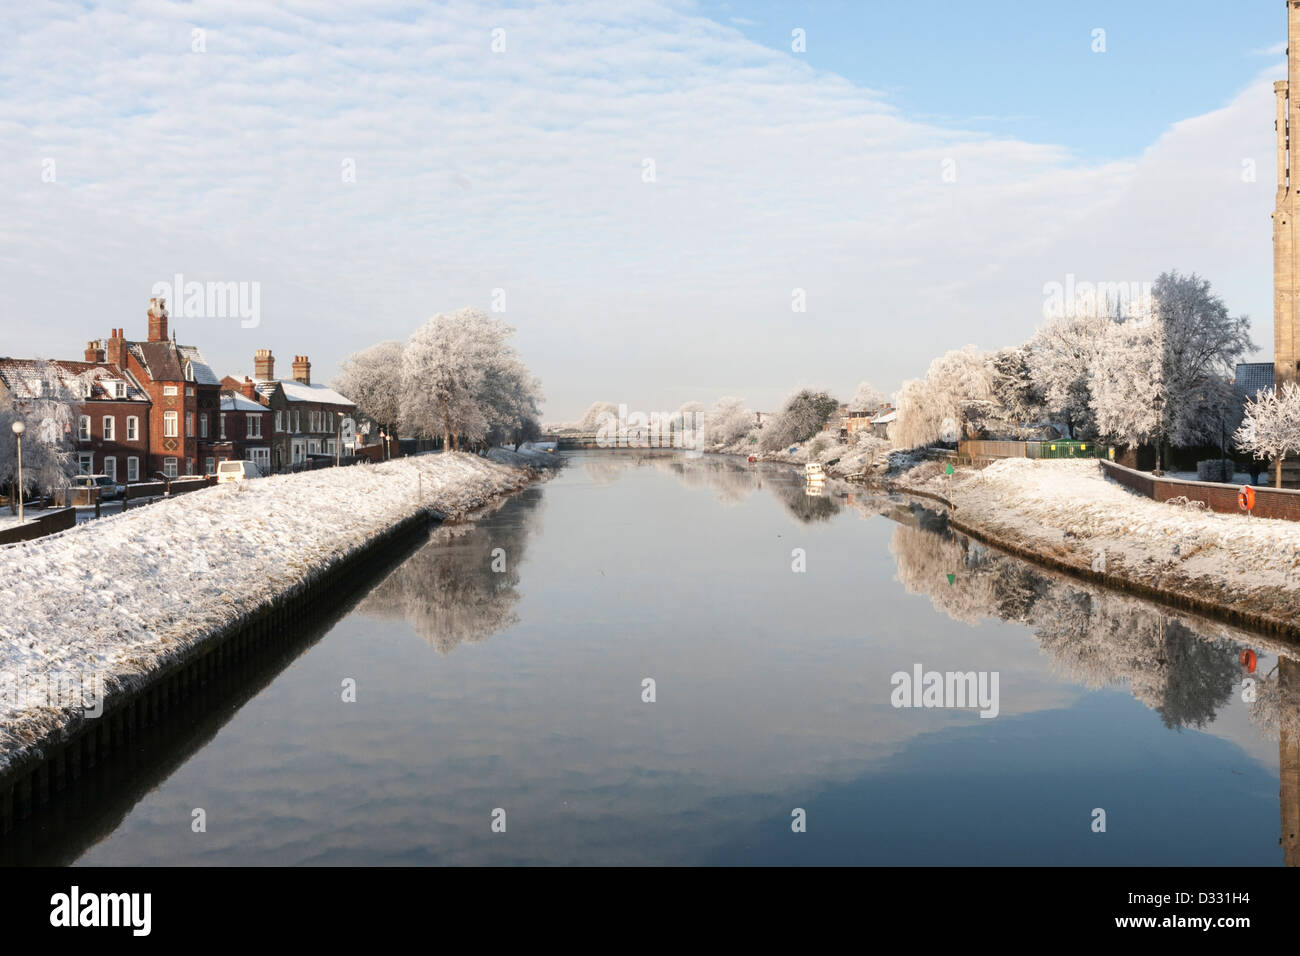 View of the Witham river in Boston, Lincolnshire. Winter scenery in landscape mode. Stock Photo